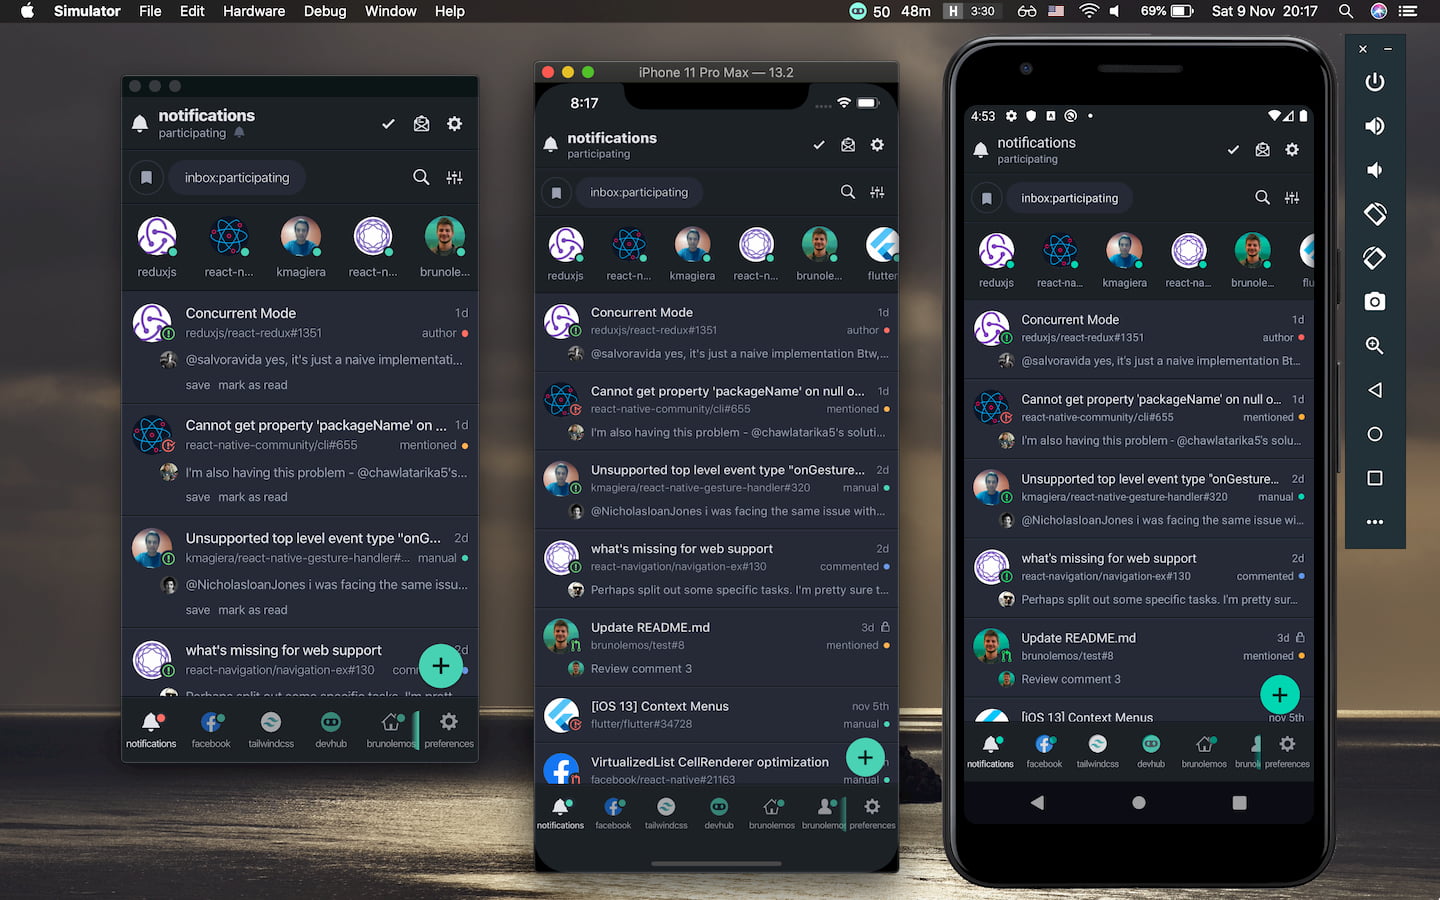 DevHub - Desktop app with Menubar mode, and a Push Notification at the top right